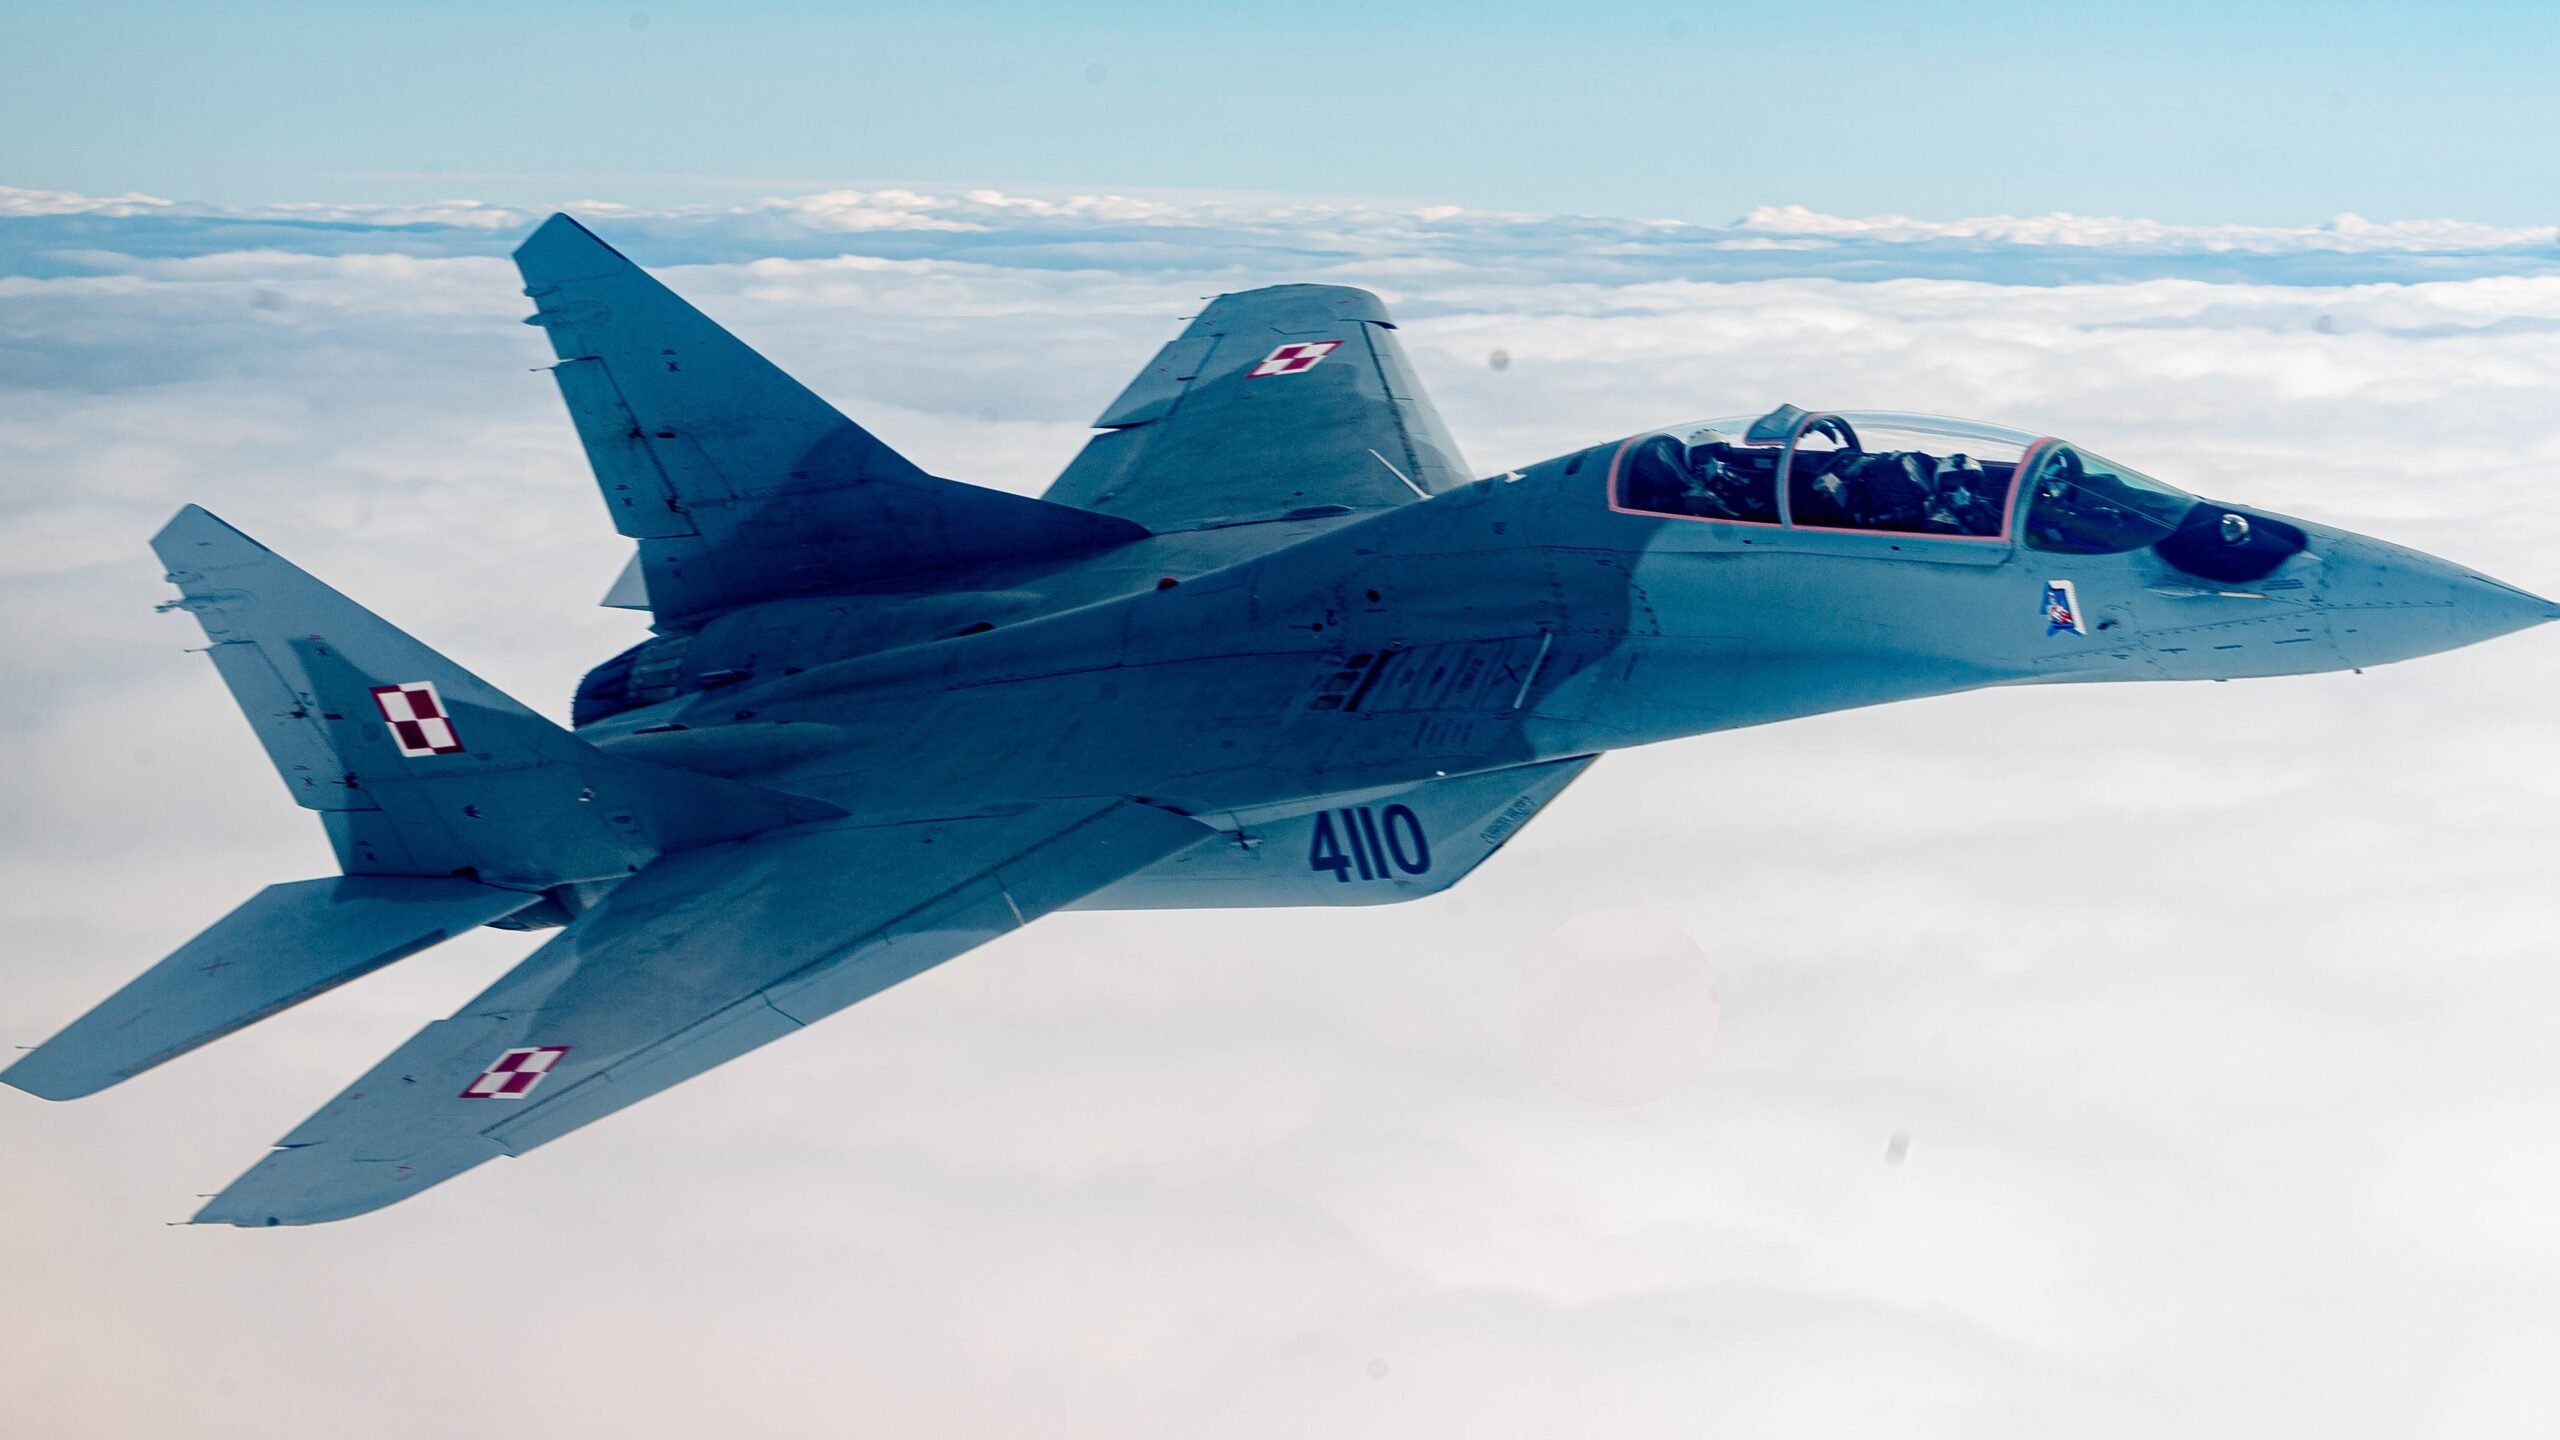 Poland’s ‘surprise’ MiG-29 offer for Ukraine not ‘tenable,’ US says